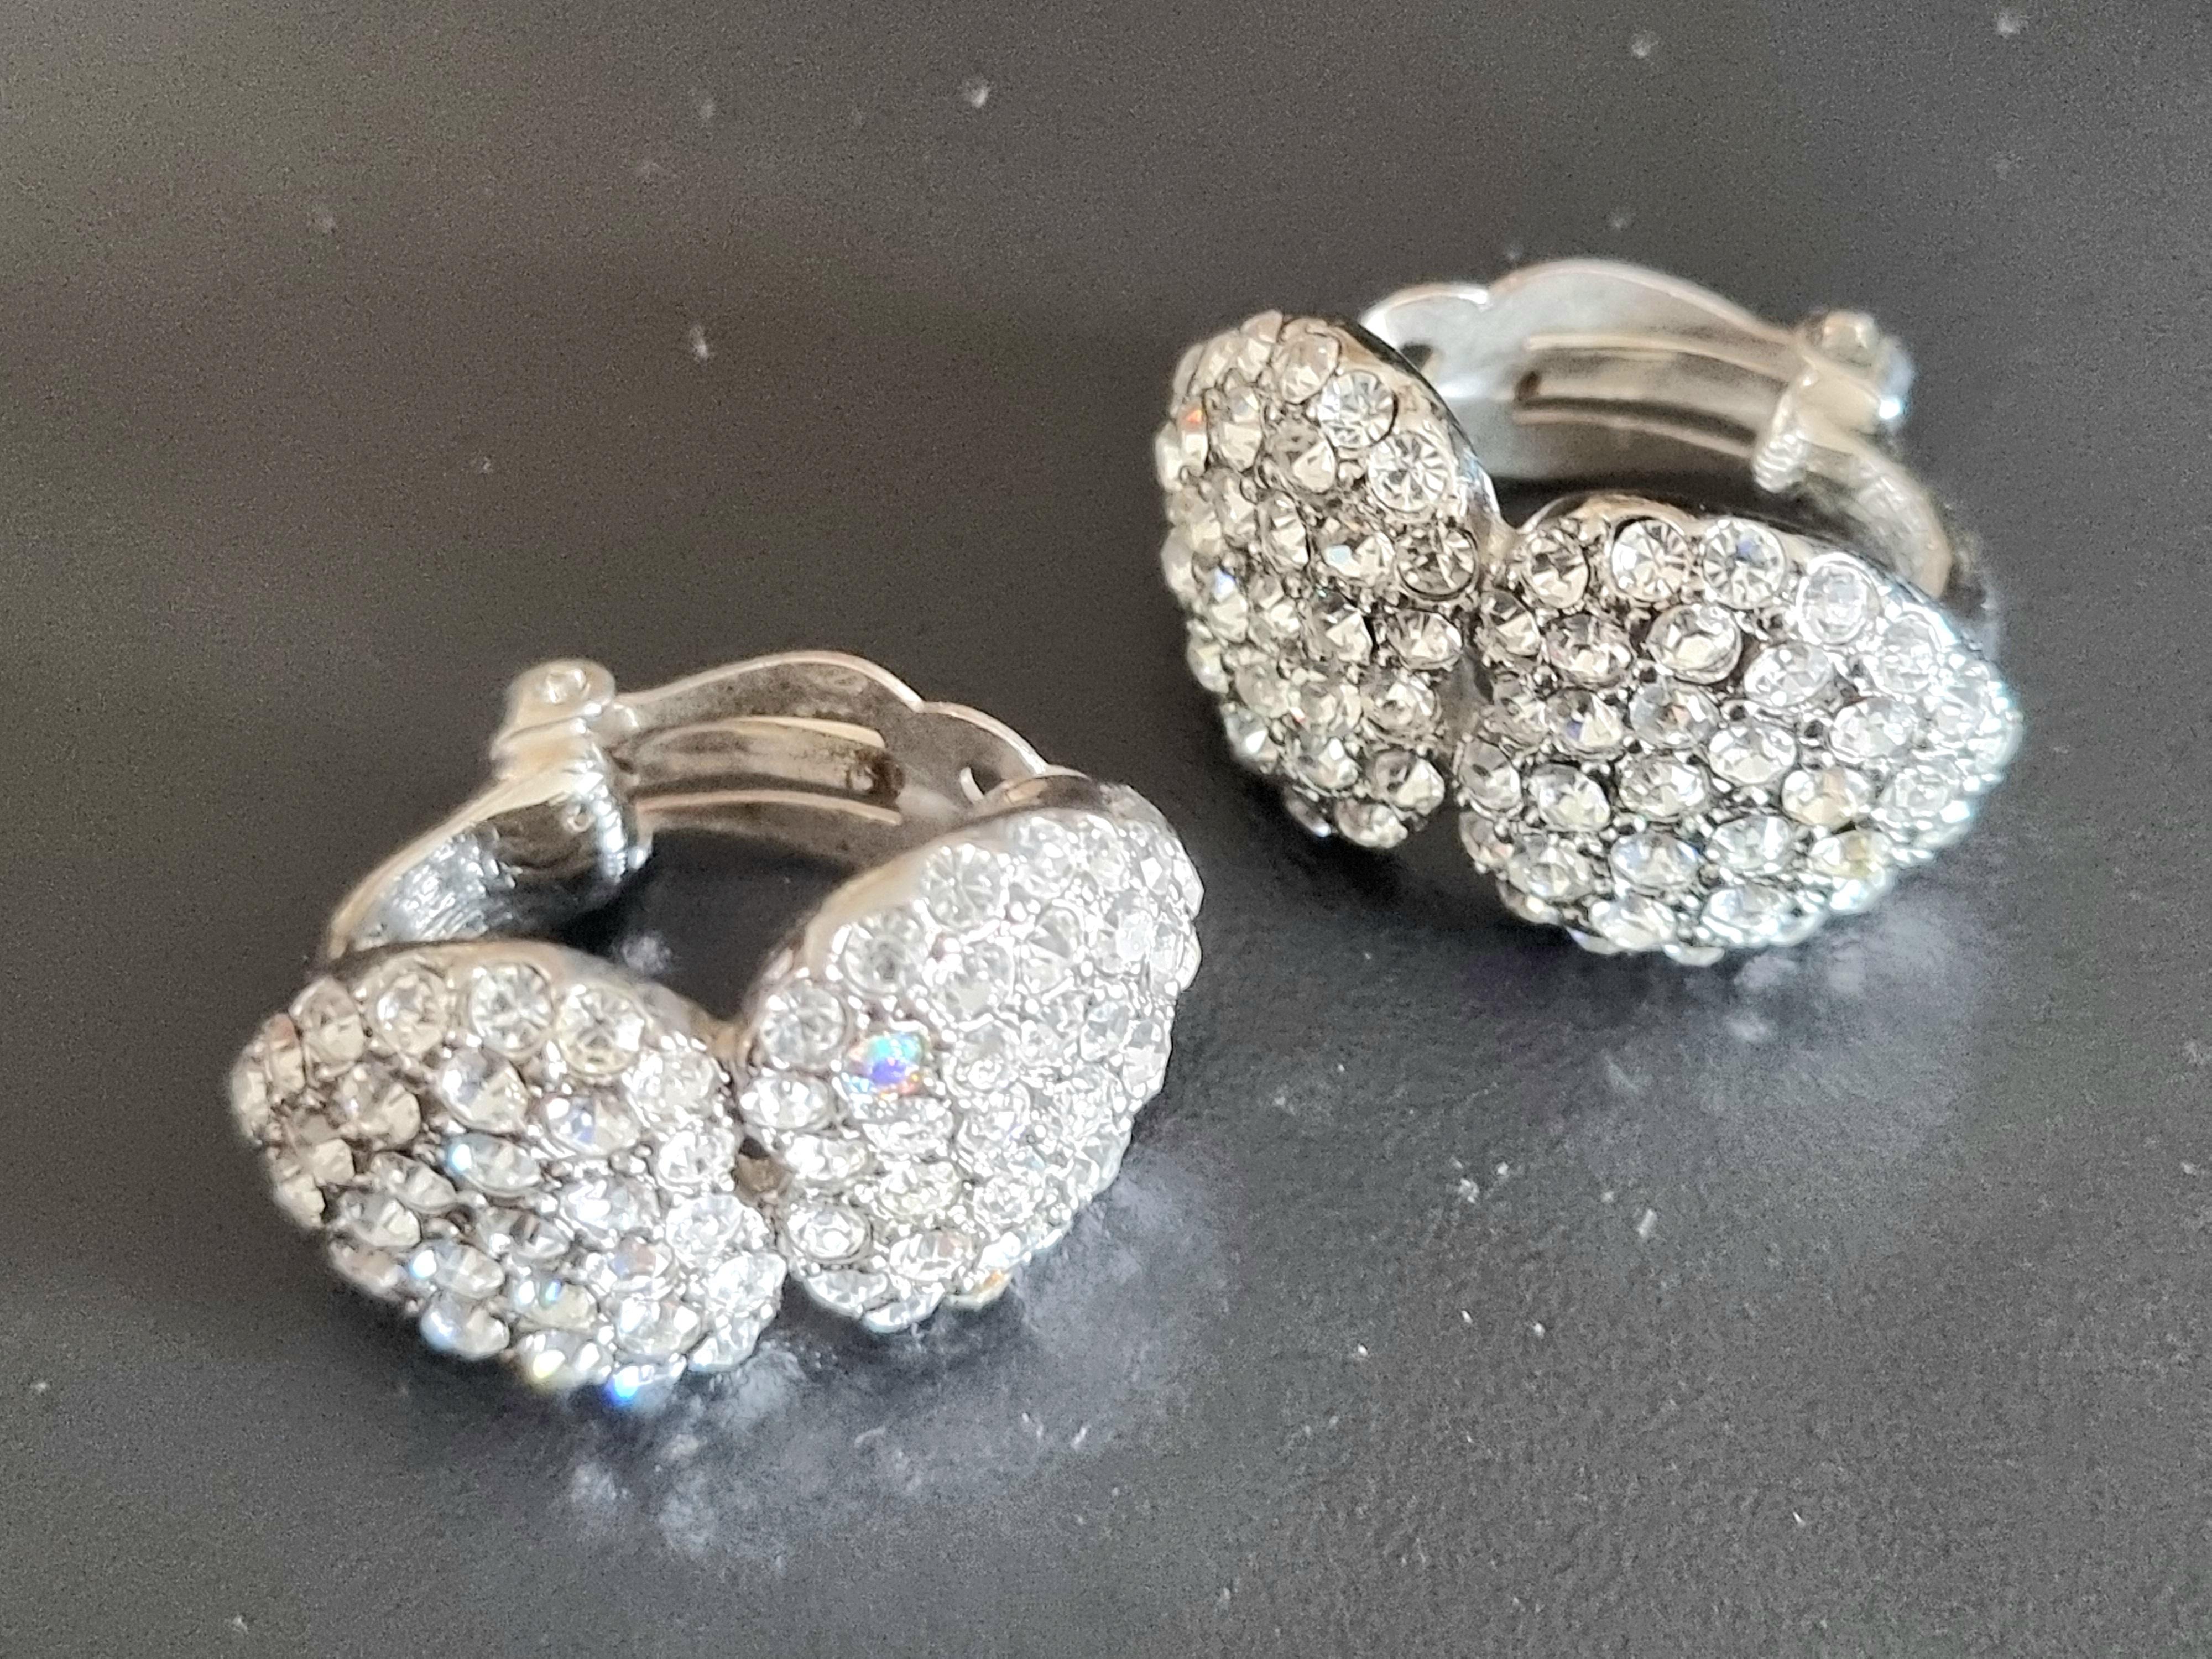 Magnificent Clip-on Earrings,
80s vintage,
in silver metal adorned with glass rhinestones,
by YVES SAINT LAURENT, haute couture, 
signed YSL (clasp and on the back), inscription 